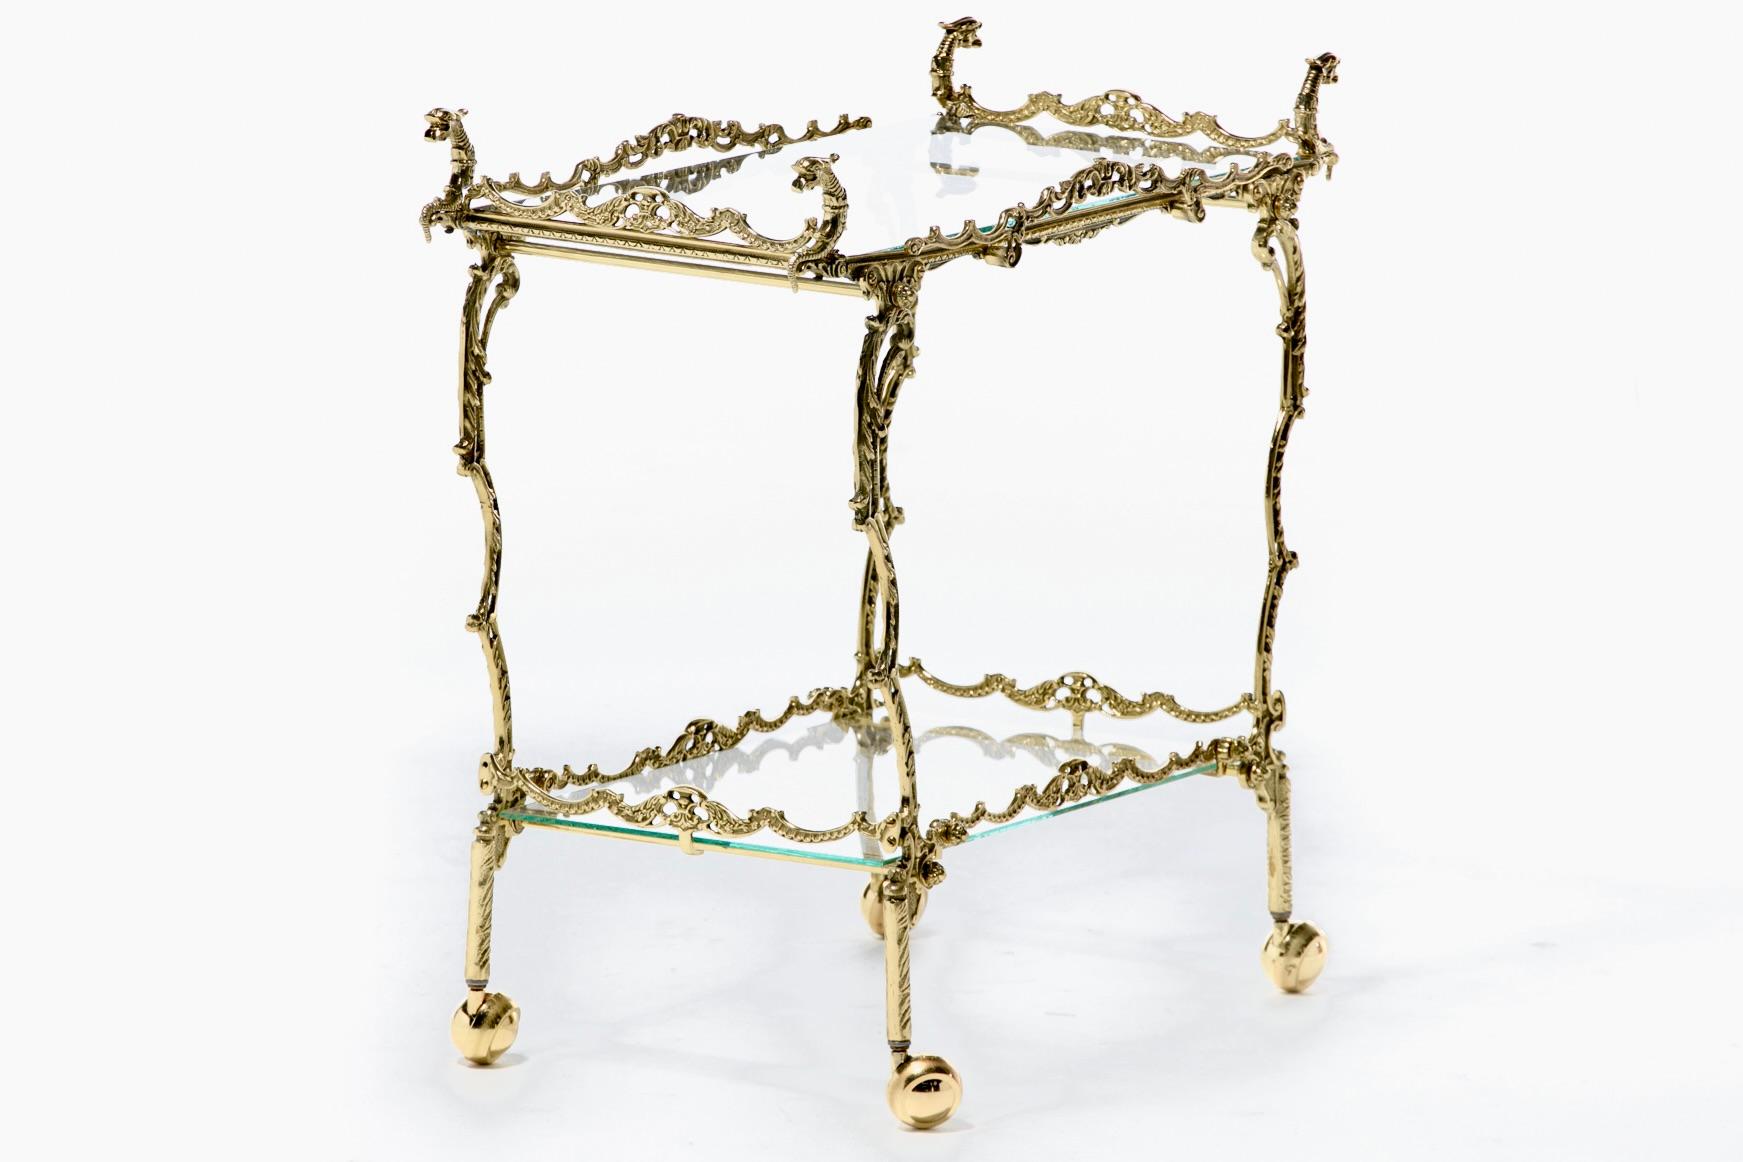 Hollywood Regency Ornate Chinoiserie Polished Brass Bar Cart c. 1955 For Sale 2